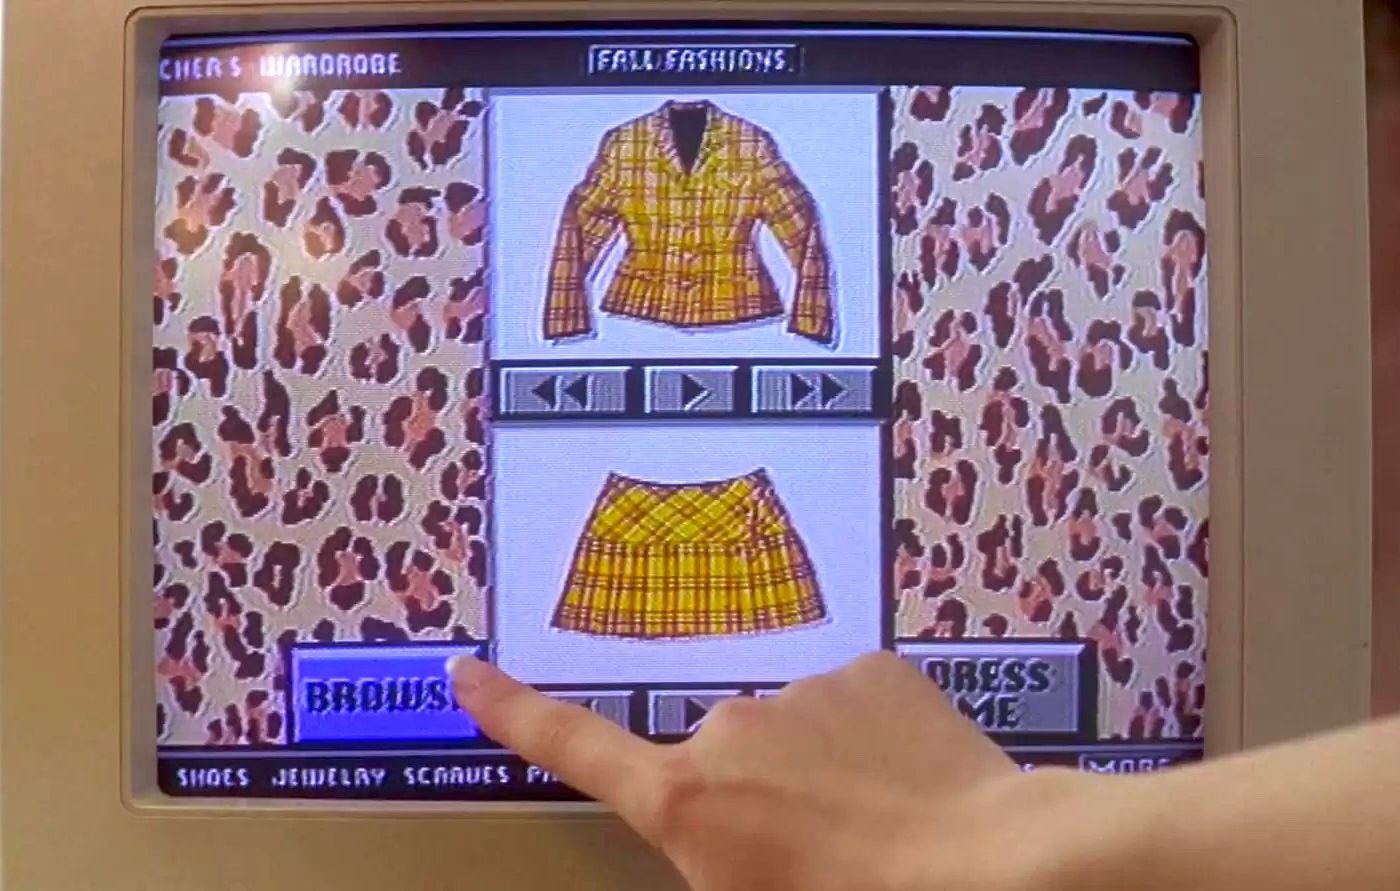 Cher's famous outfit selection software in "Clueless."